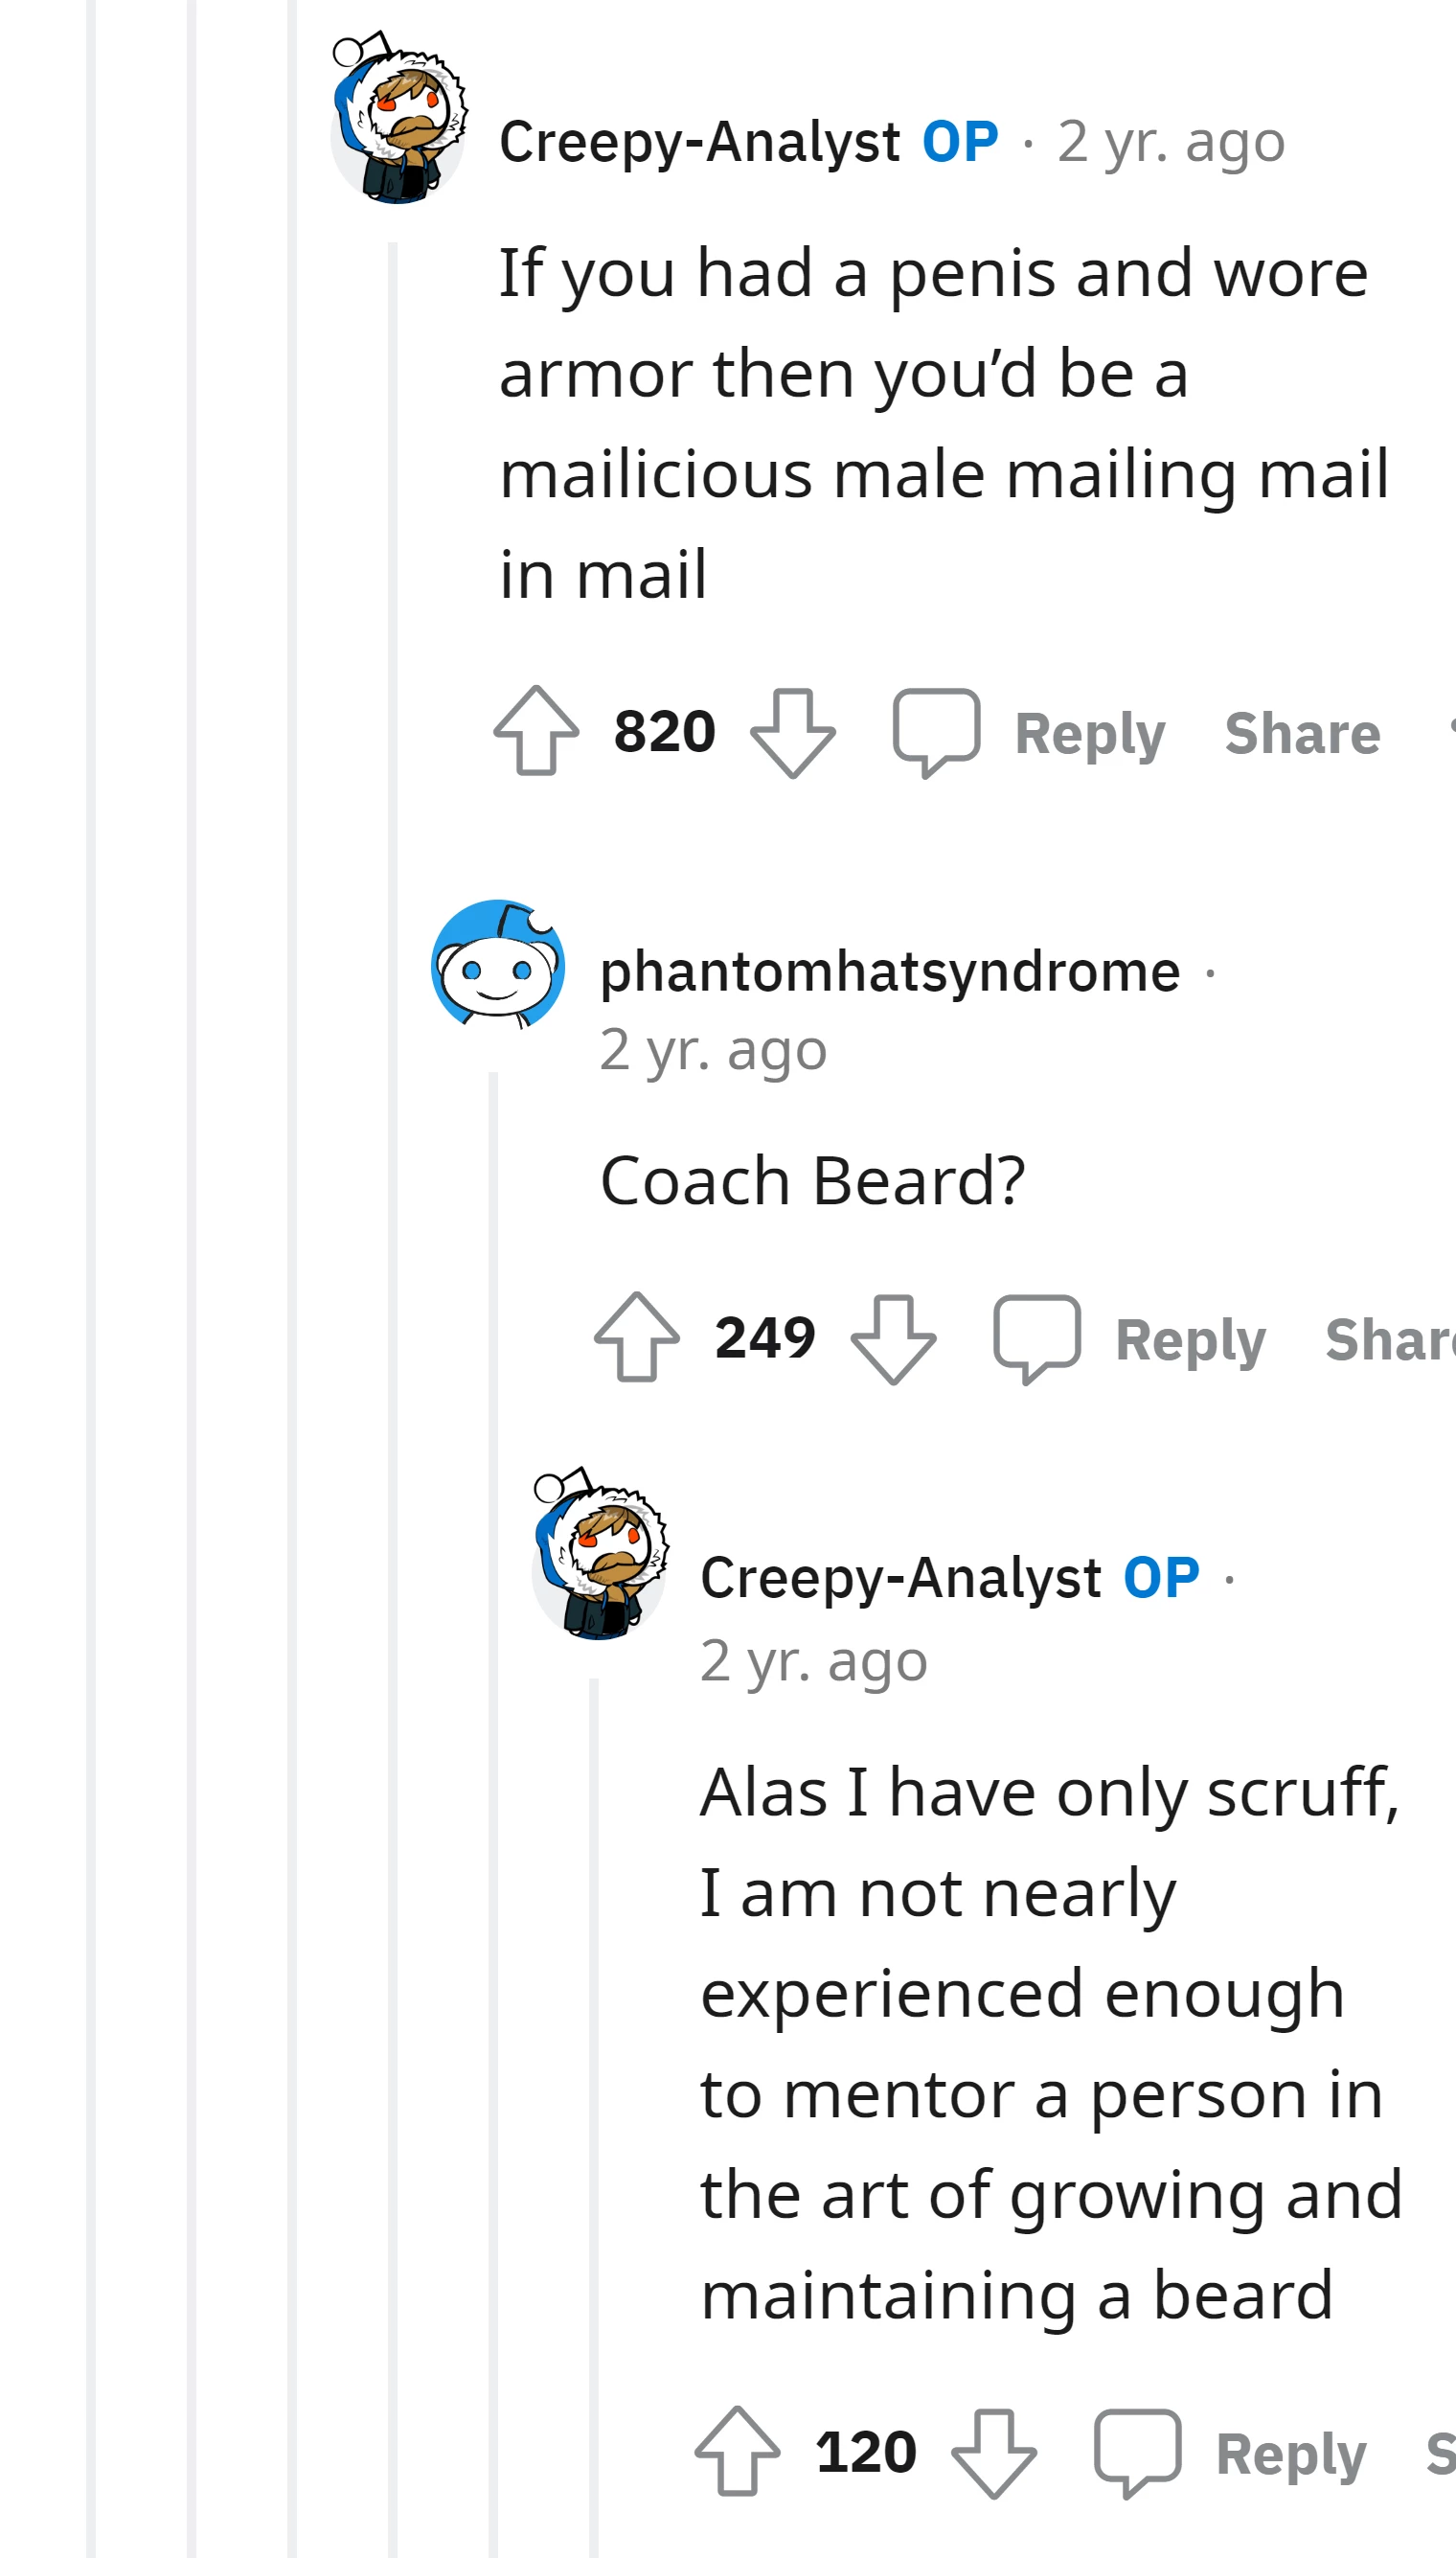 The OP humorously laments not having enough beard experience to mentor someone